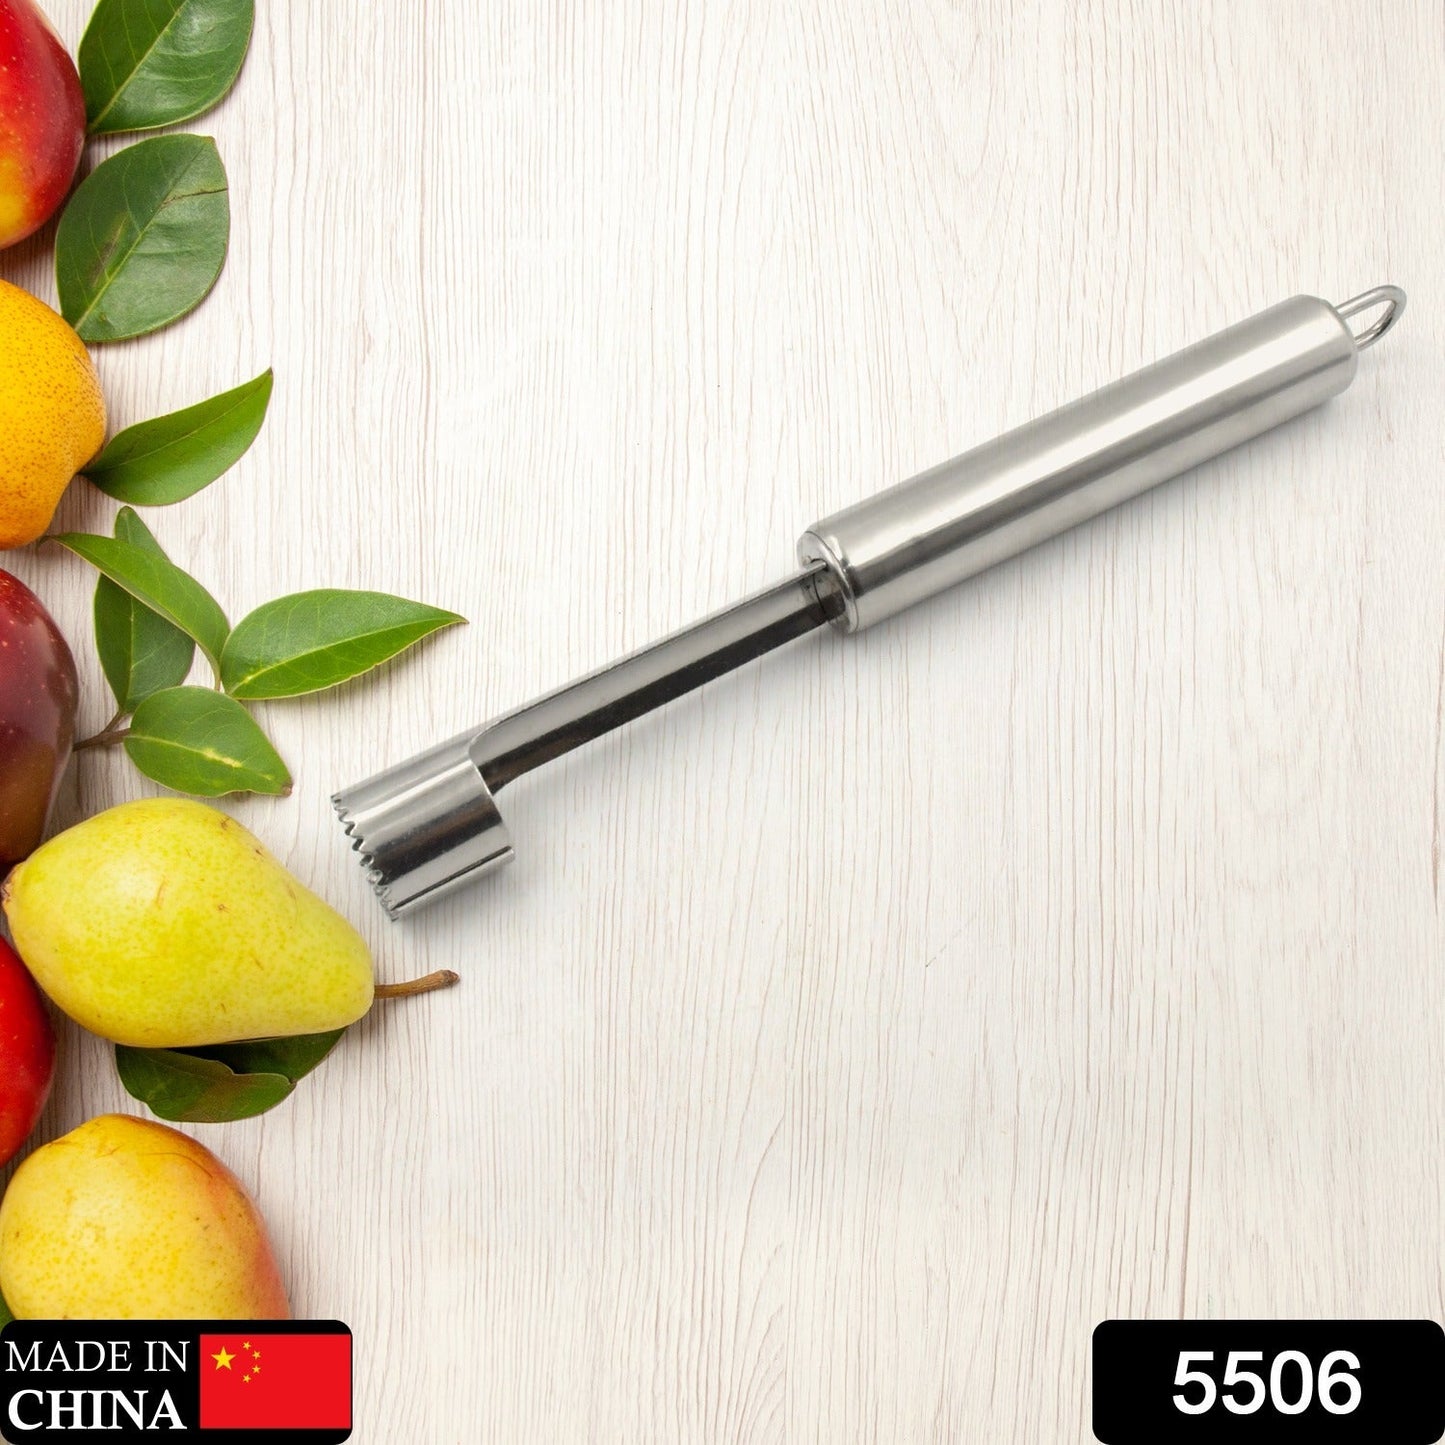 5506 Fruit Core Stainless Steel Set, Core Remover for Apple and Pear, Kitchen Prep Tool Fruit Core Remover Tool with Soft Handle, Apple Corer Stainless Steel, Kitchen Gadget Dishwasher Safe